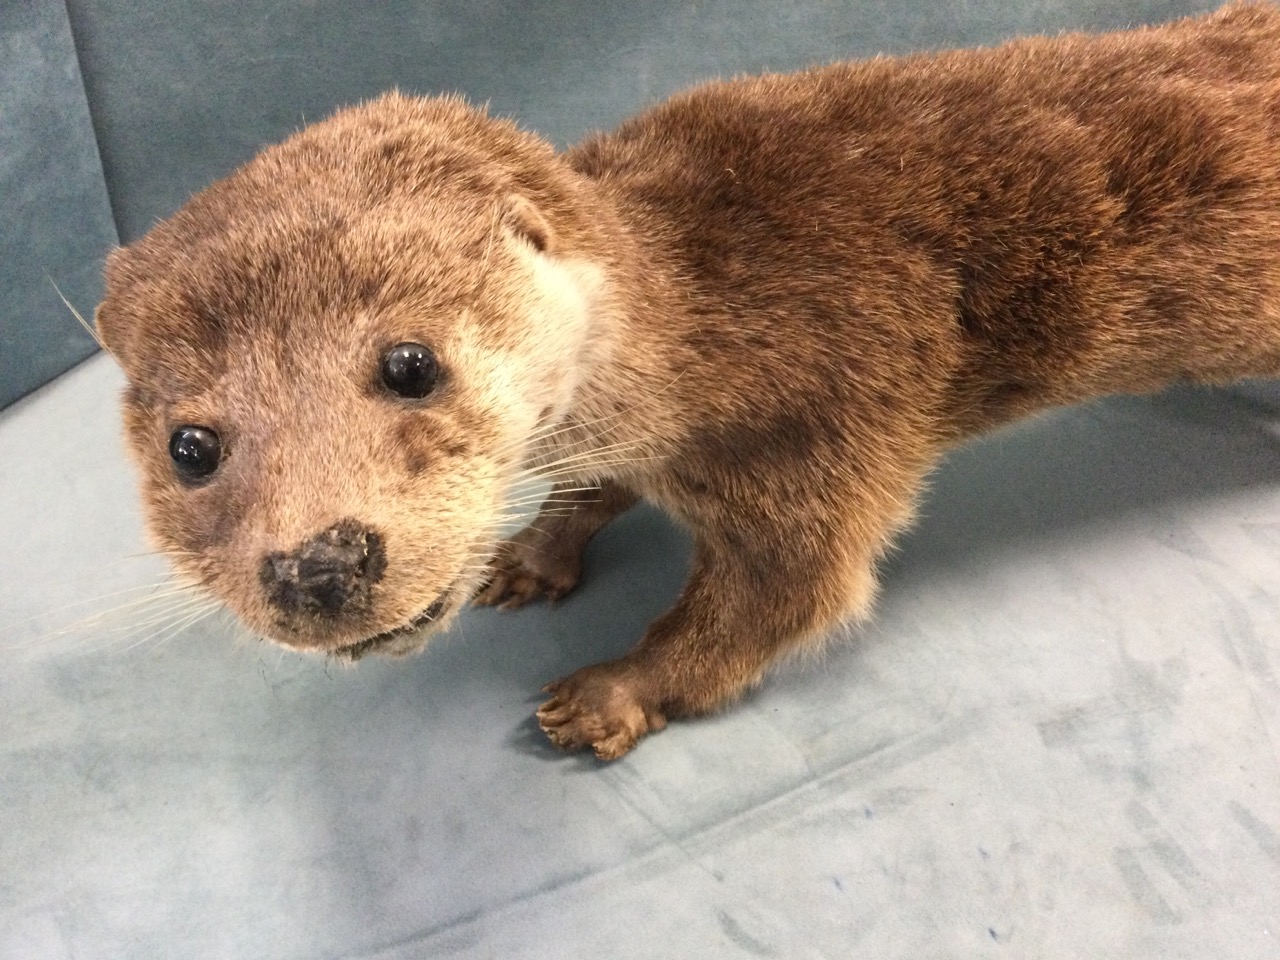 A taxidermied otter, the animal with glass eyes and extended tail. (37in) - Image 3 of 3